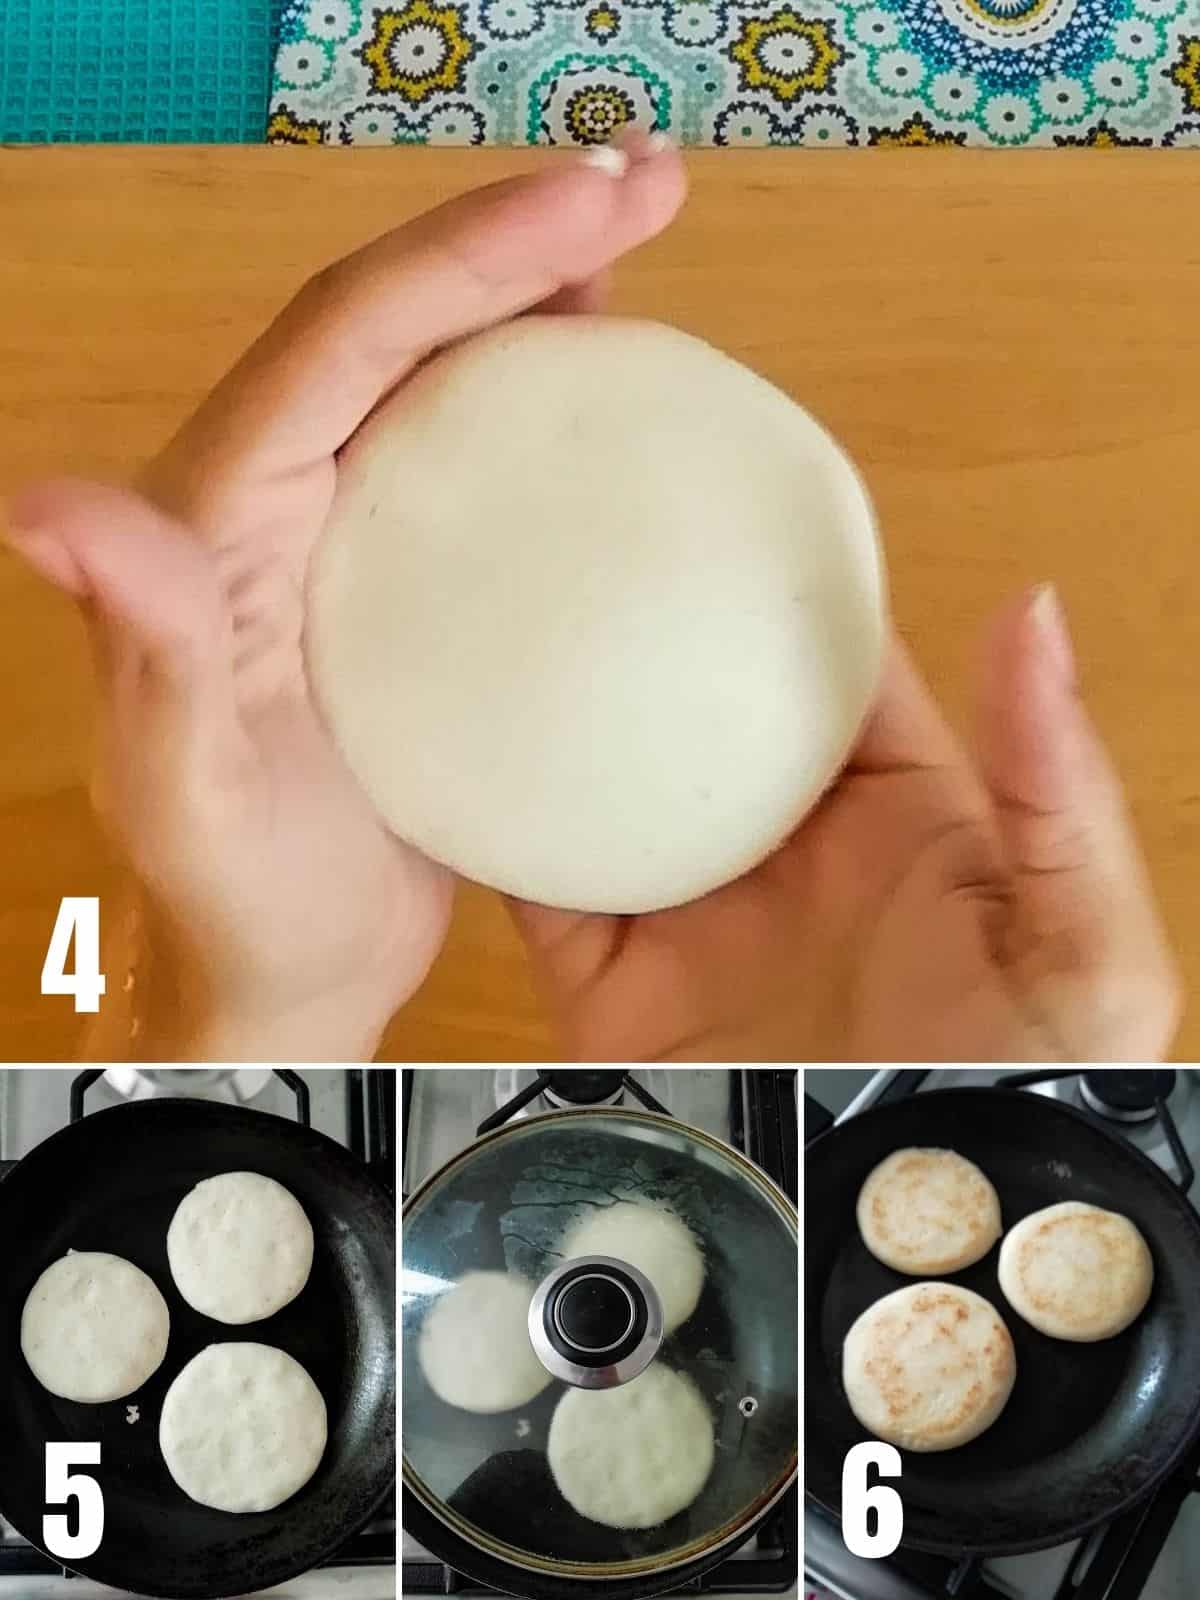 Collage of pictures showing how to shape and cook Venezuelan arepas